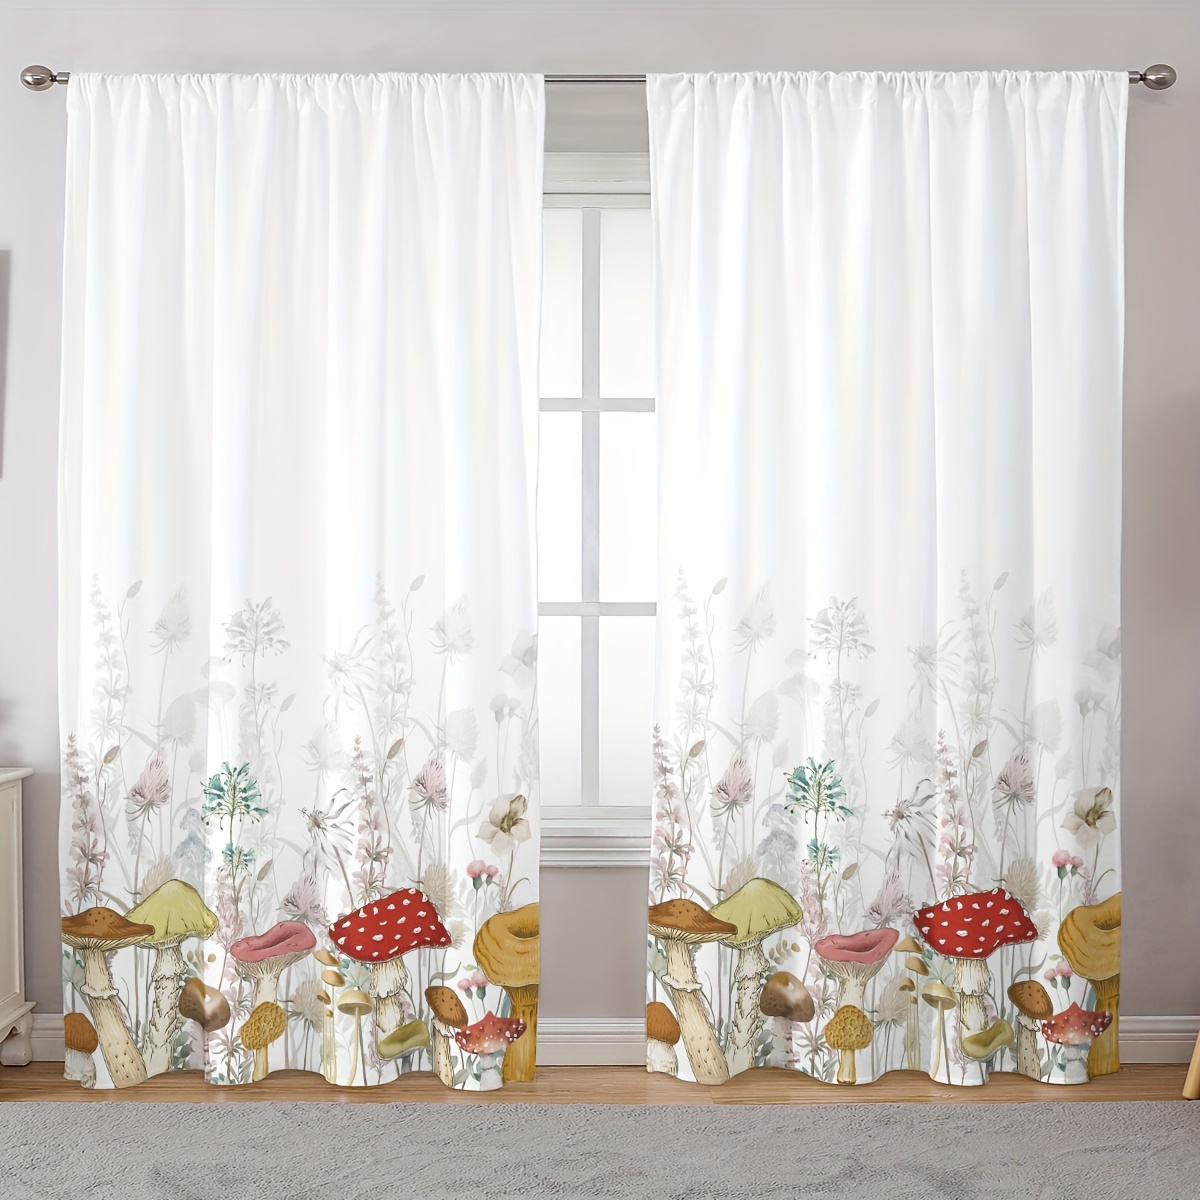 

Classic Mushroom And Botanical Print 2-piece Curtain Set - Semi-sheer Polyester Window Panels With Rod Pocket, Arts Themed Decorative Drapery For Bedroom & Various Rooms, Hand Wash, Woven, Design